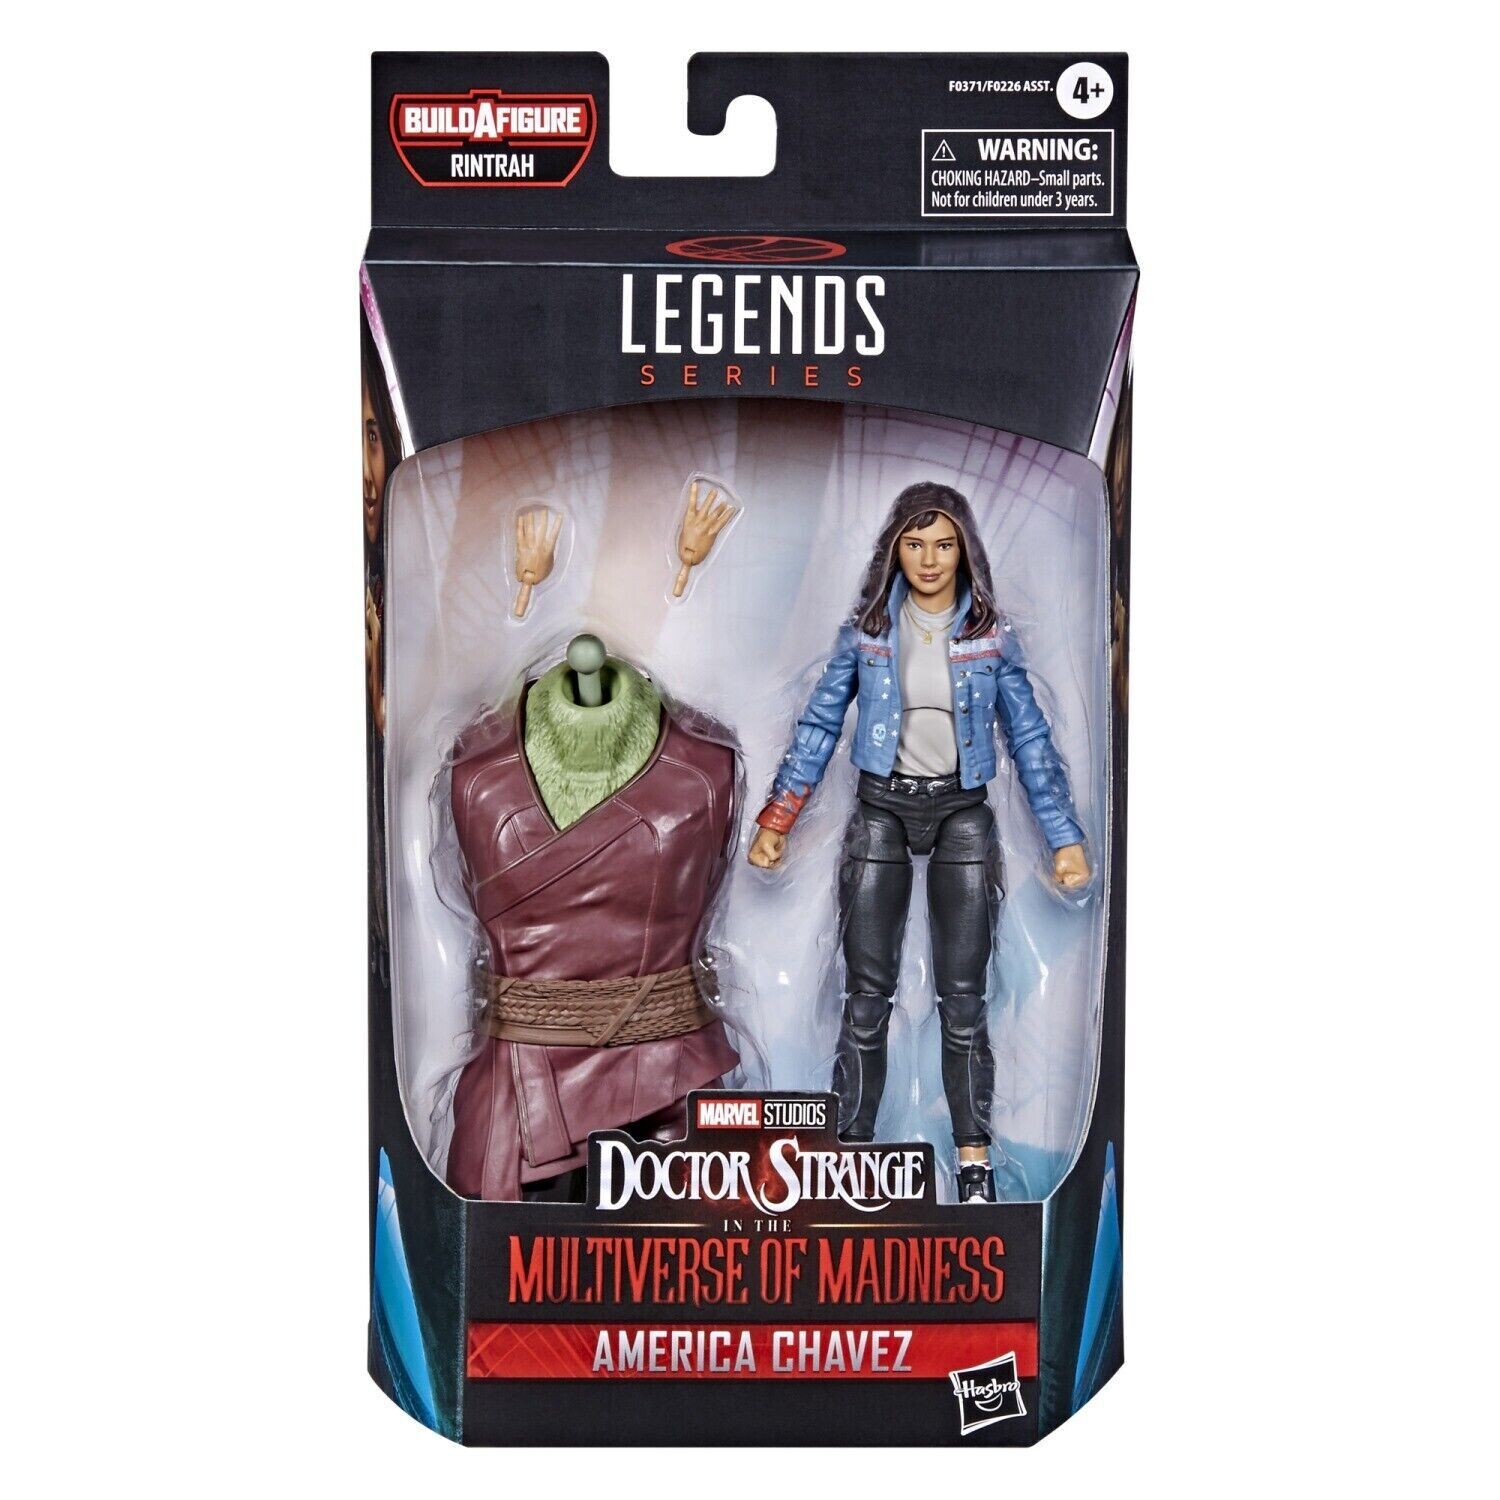 Actiefiguur, America Chavez, Doctor Strange in the Multiverse of Madness, Marvel Legends